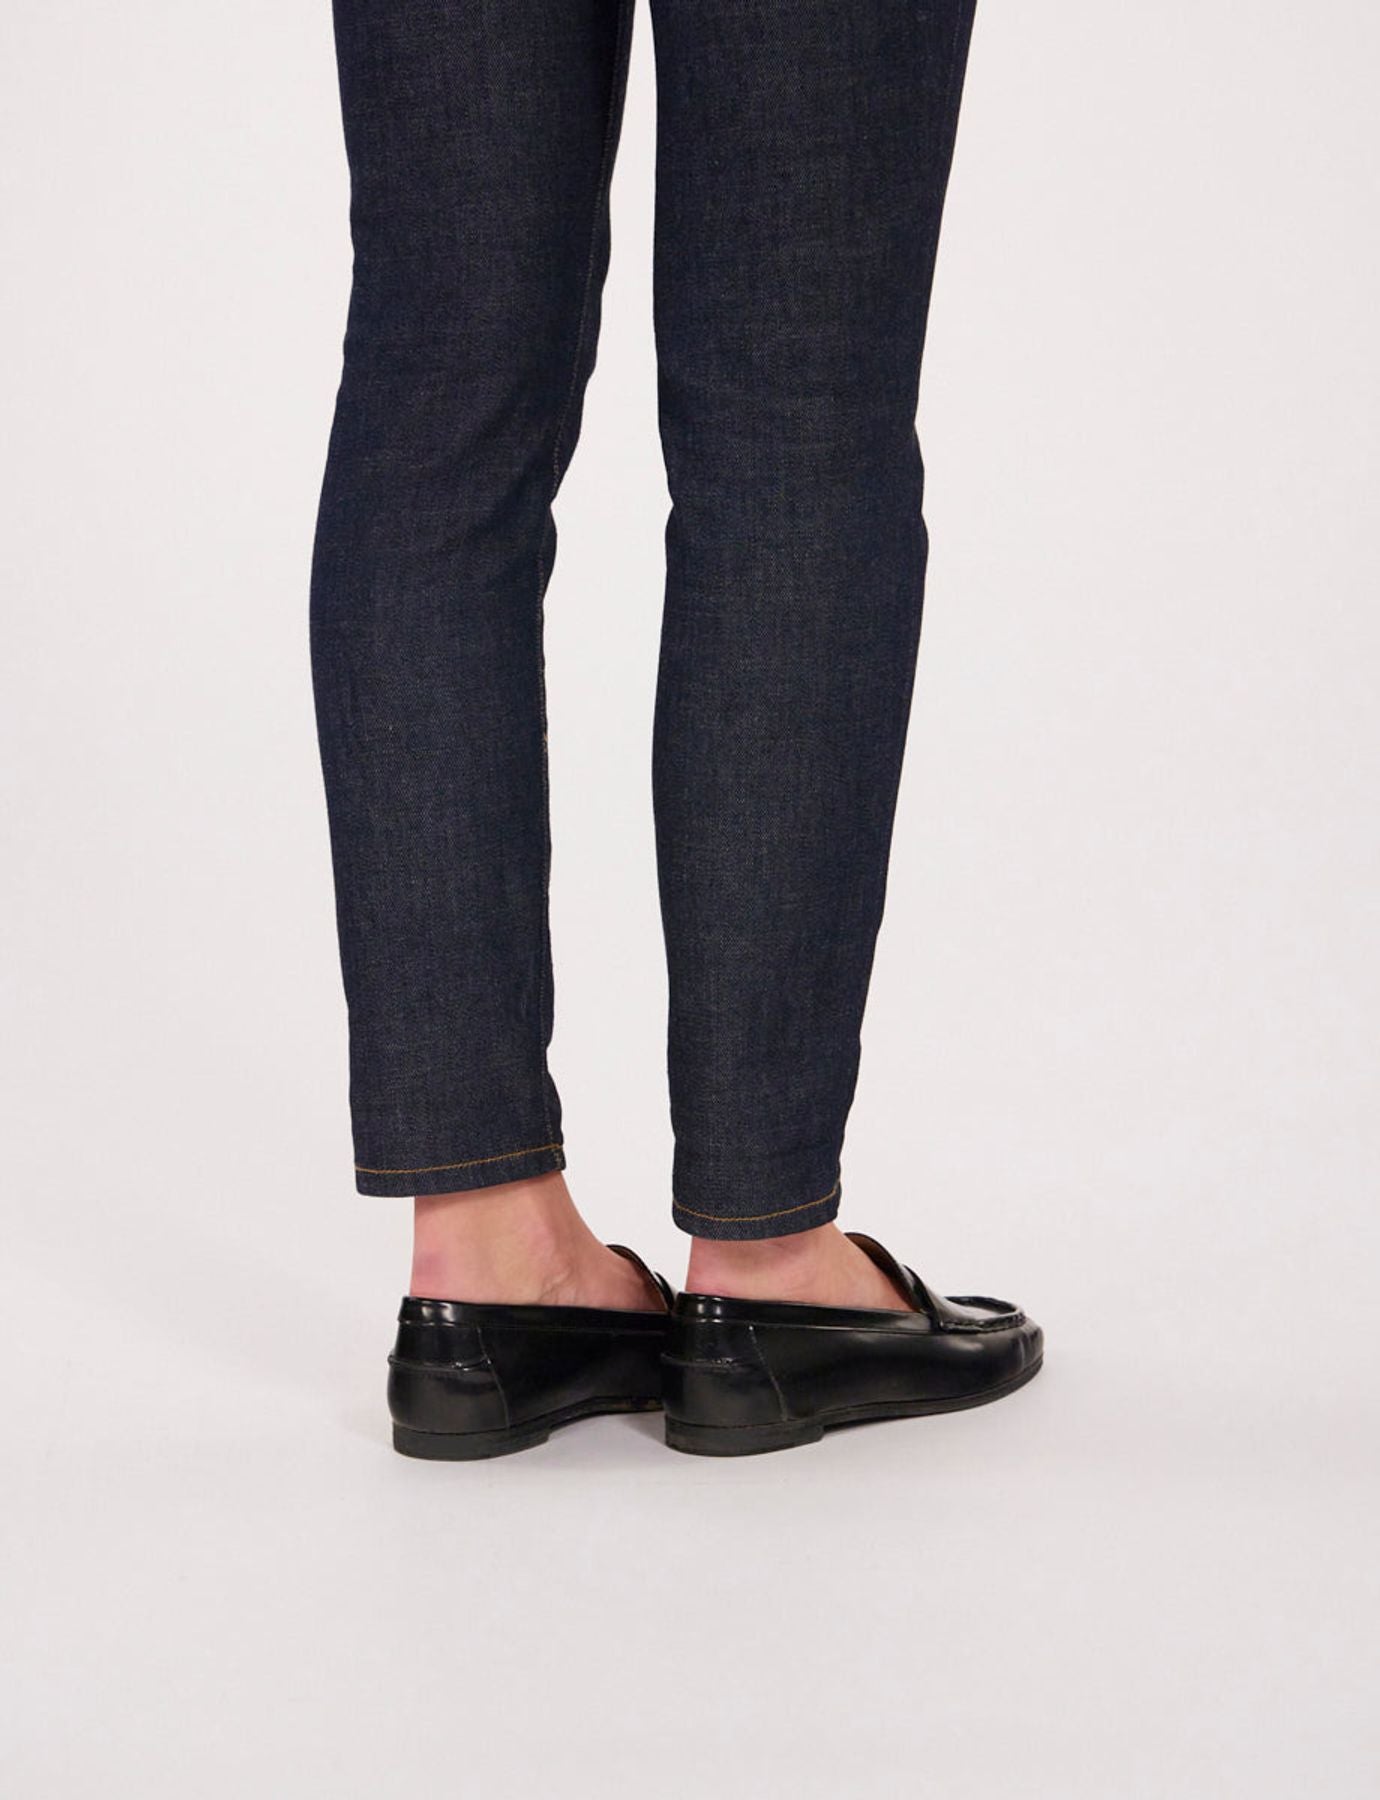 moccasins-in-leather-black